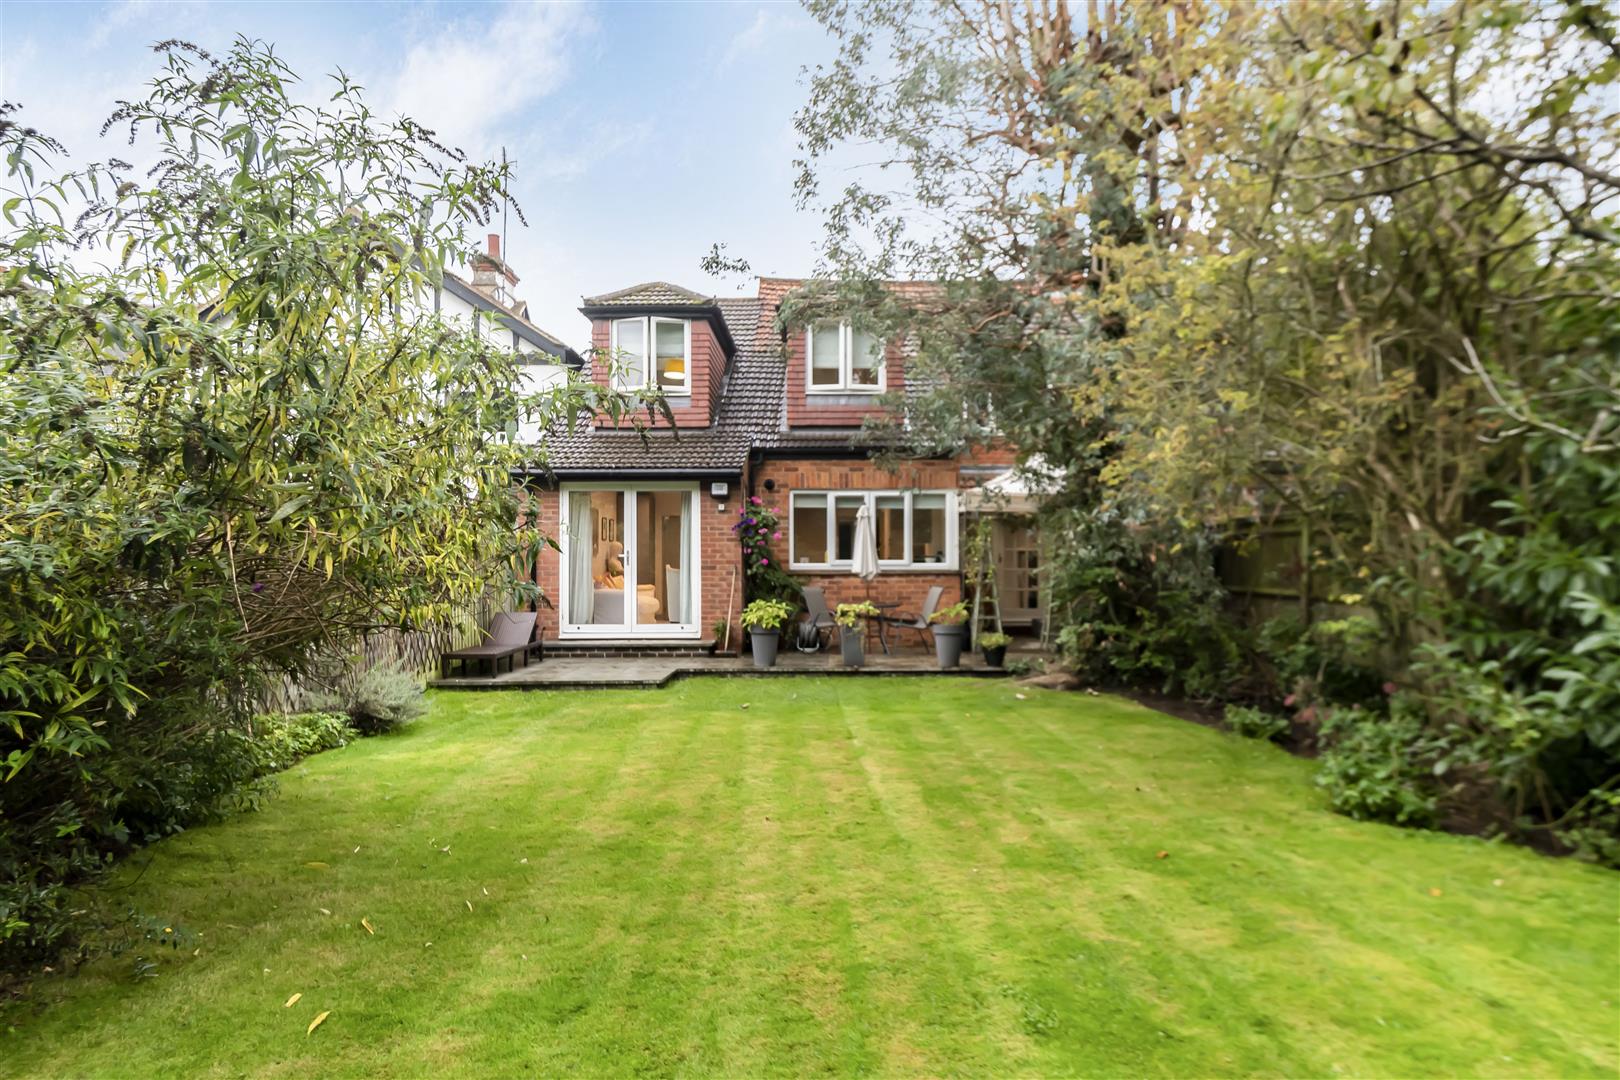 Matlock Road  house for sale in Reading